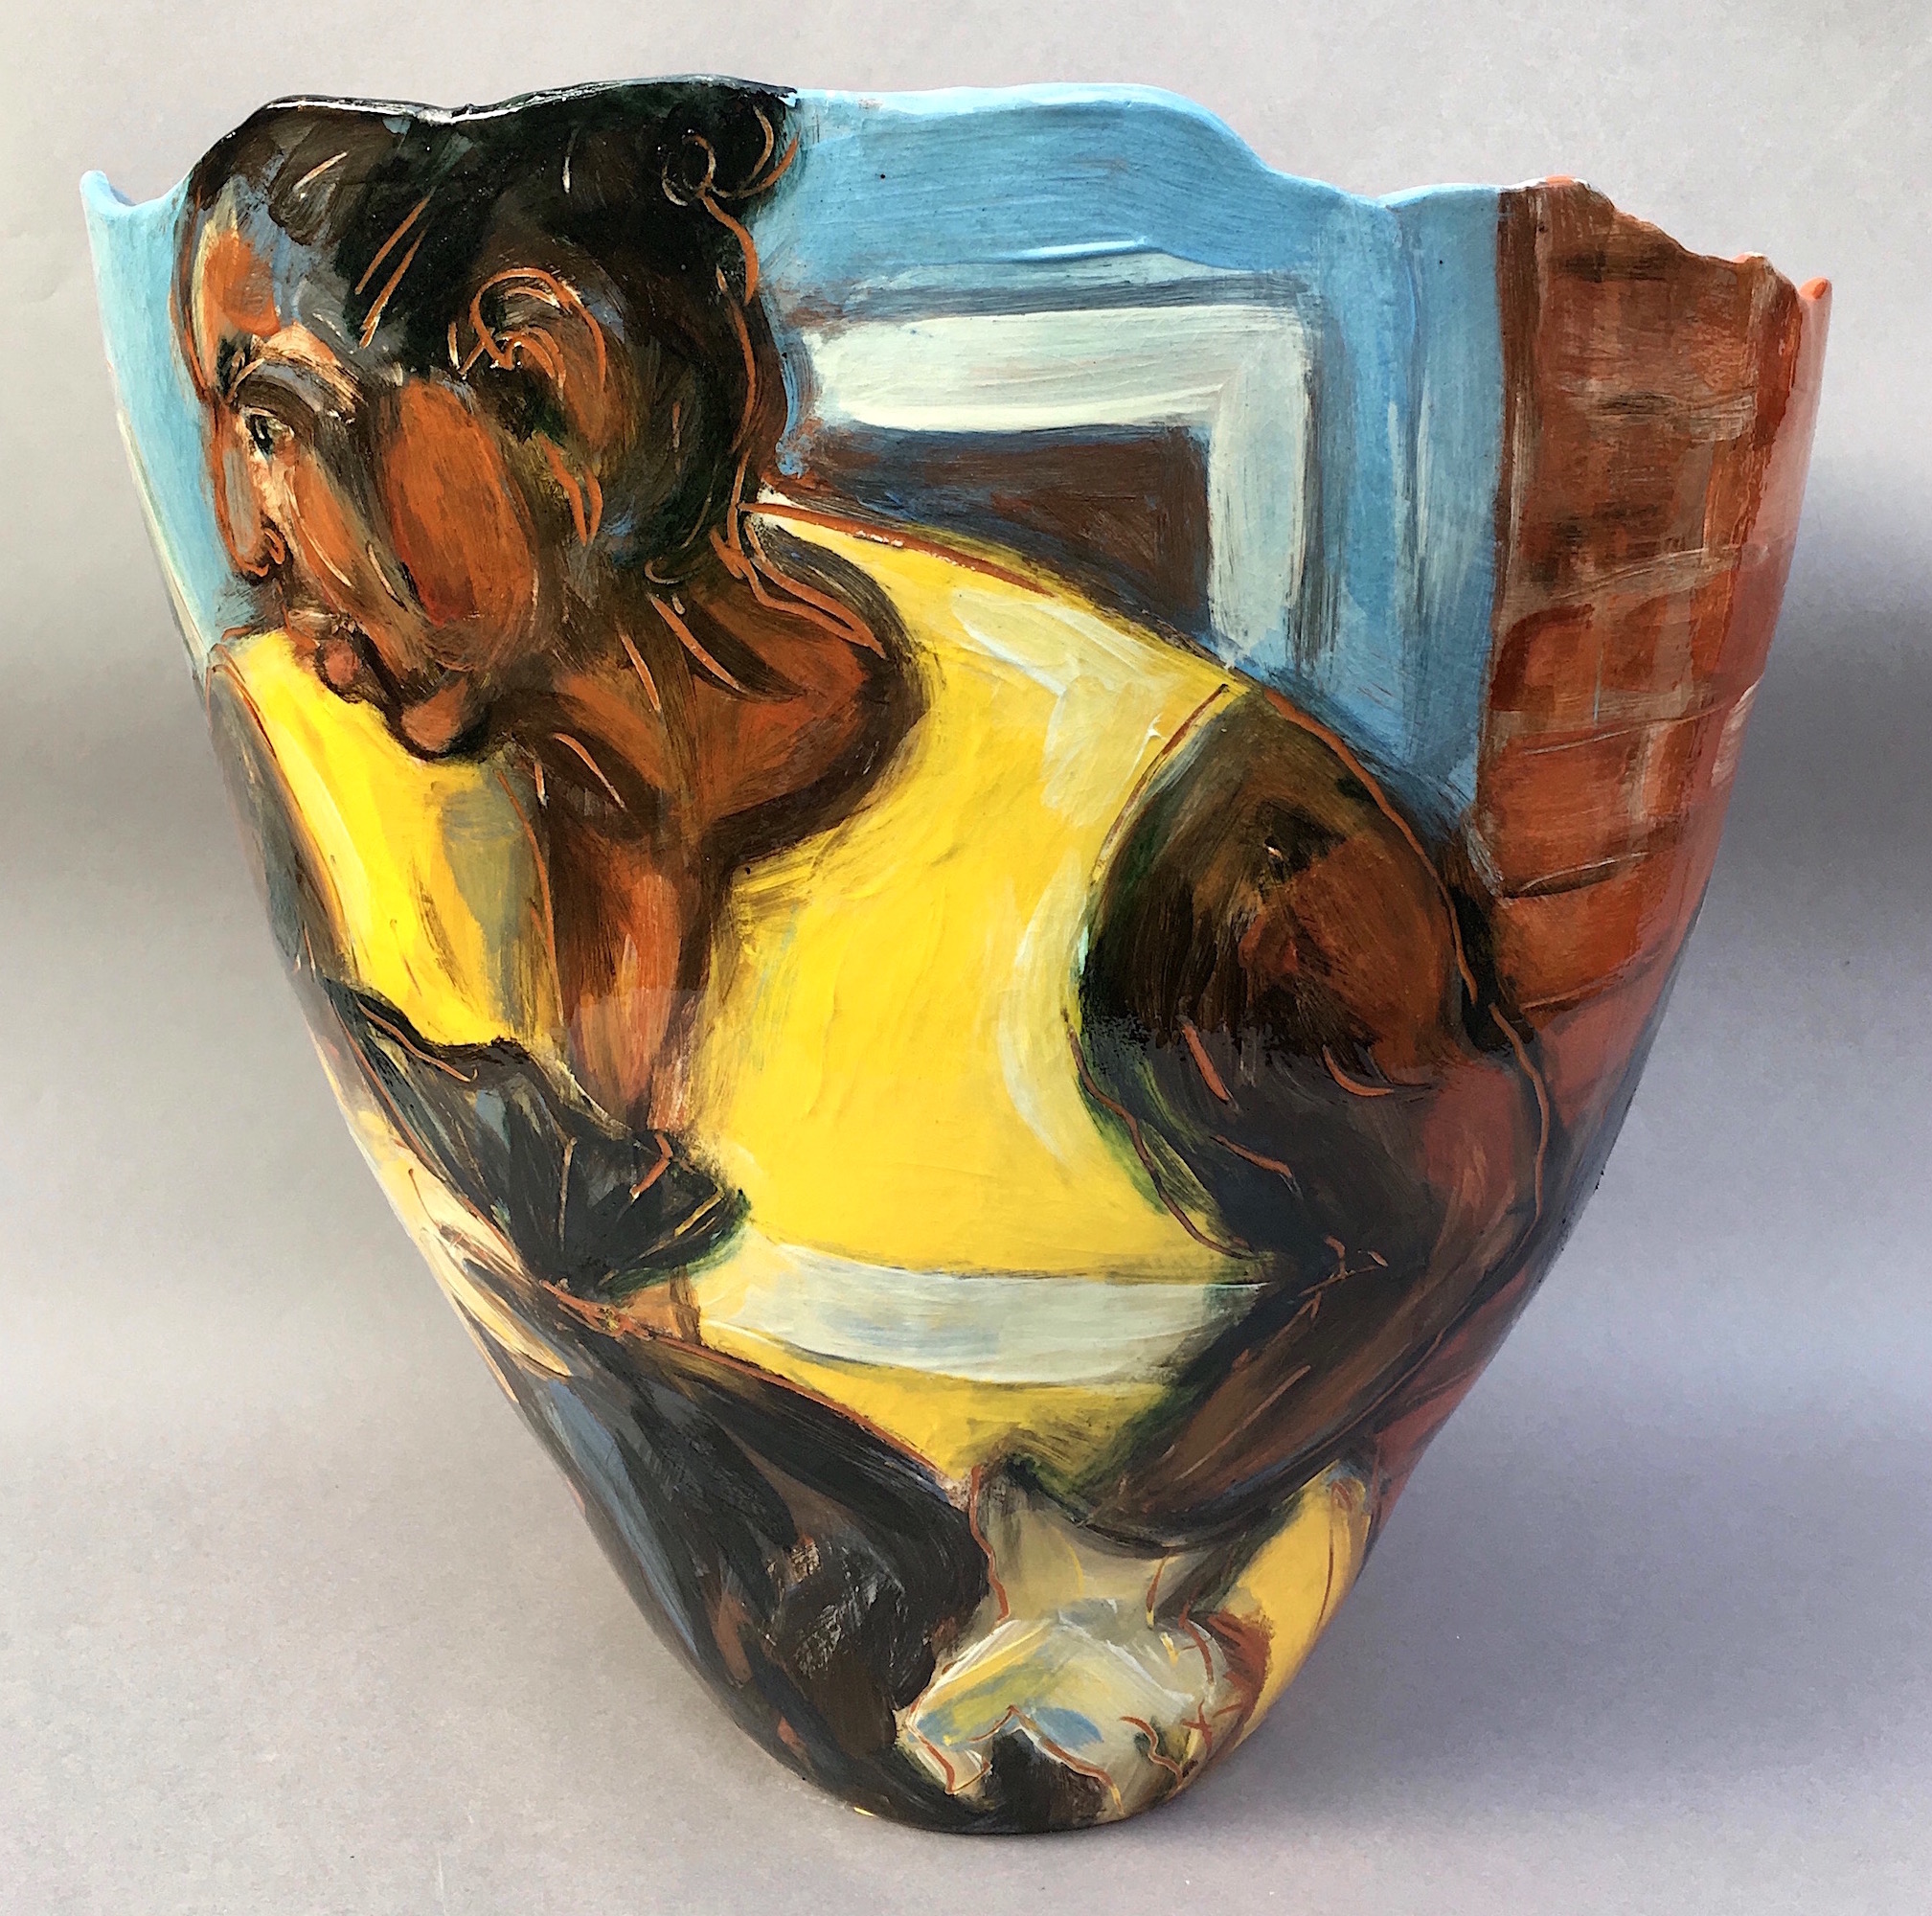 Jitka Palmer, "Dustbin Men", earthenware clay, 2018, 40 x 40 x 37cm. Handbuilt vessel painted with - Image 2 of 3